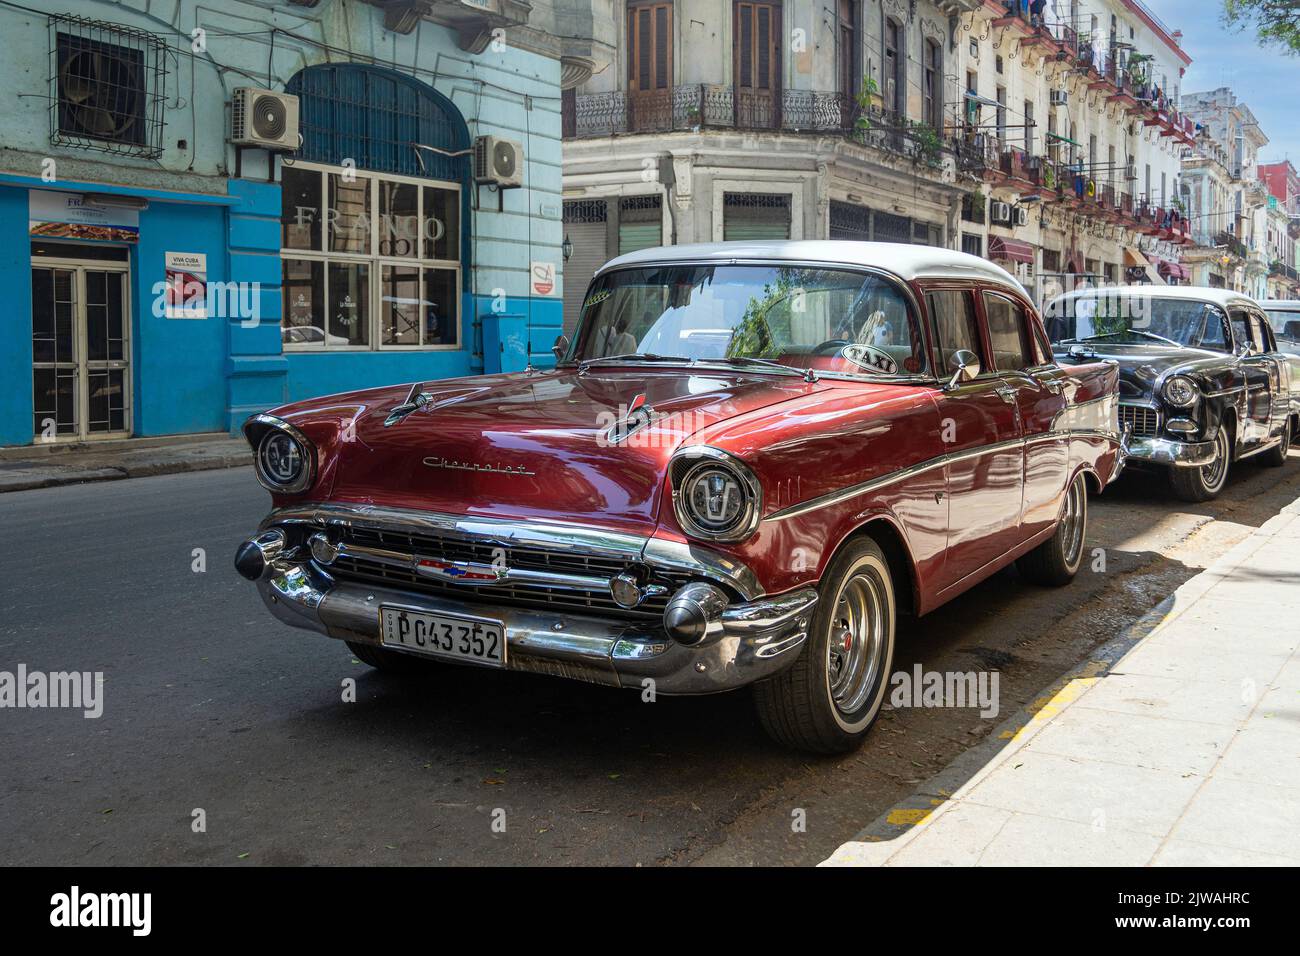 A classic, Chevrolet automobile from the 1950's parked on a street in downtown, Havana, Cuba. Stock Photo